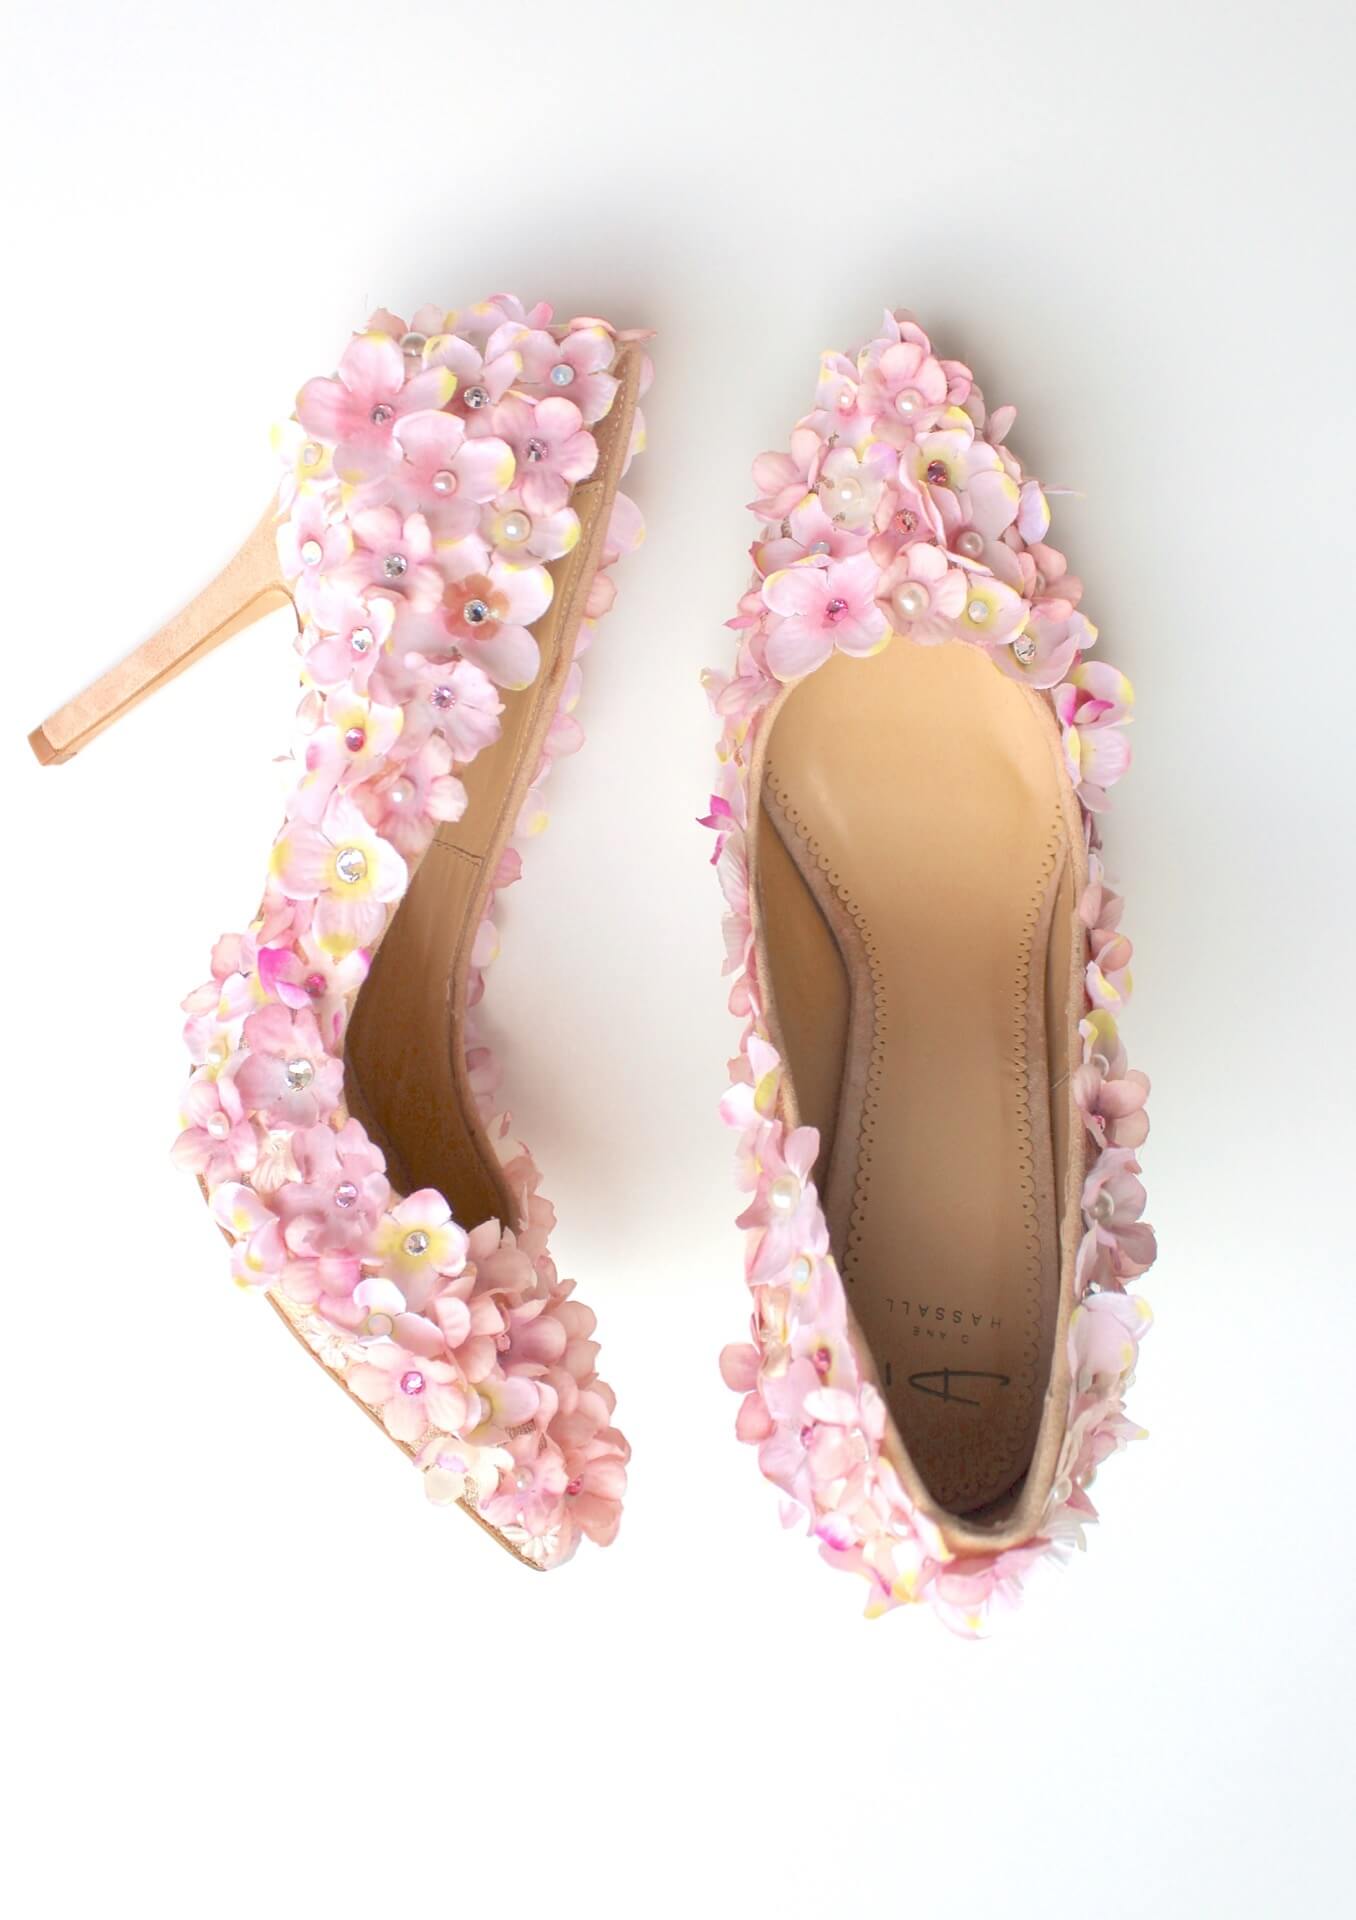 pink flowery shoes with high heels